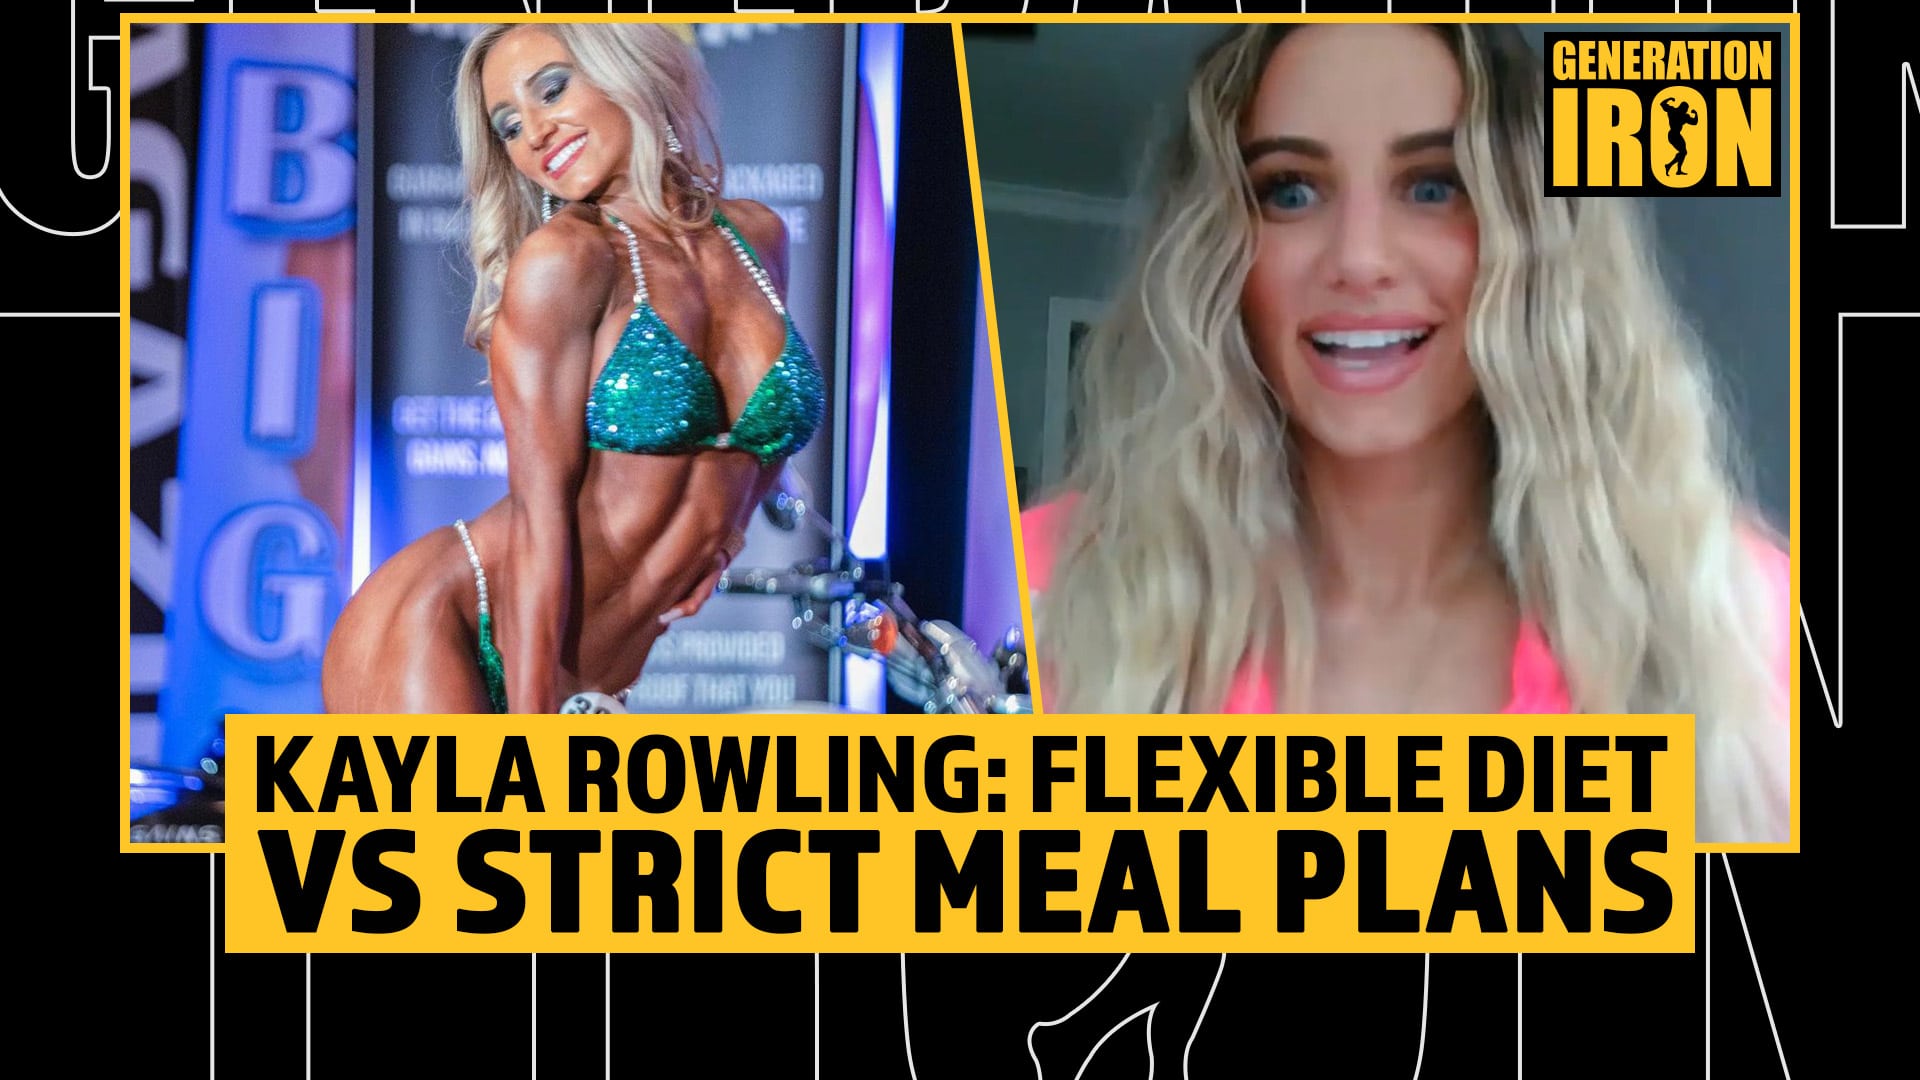 PNBA Natural Bodybuilder Kayla Rowling: How To Decide Between Flexible Dieting & A Strict Meal Plan